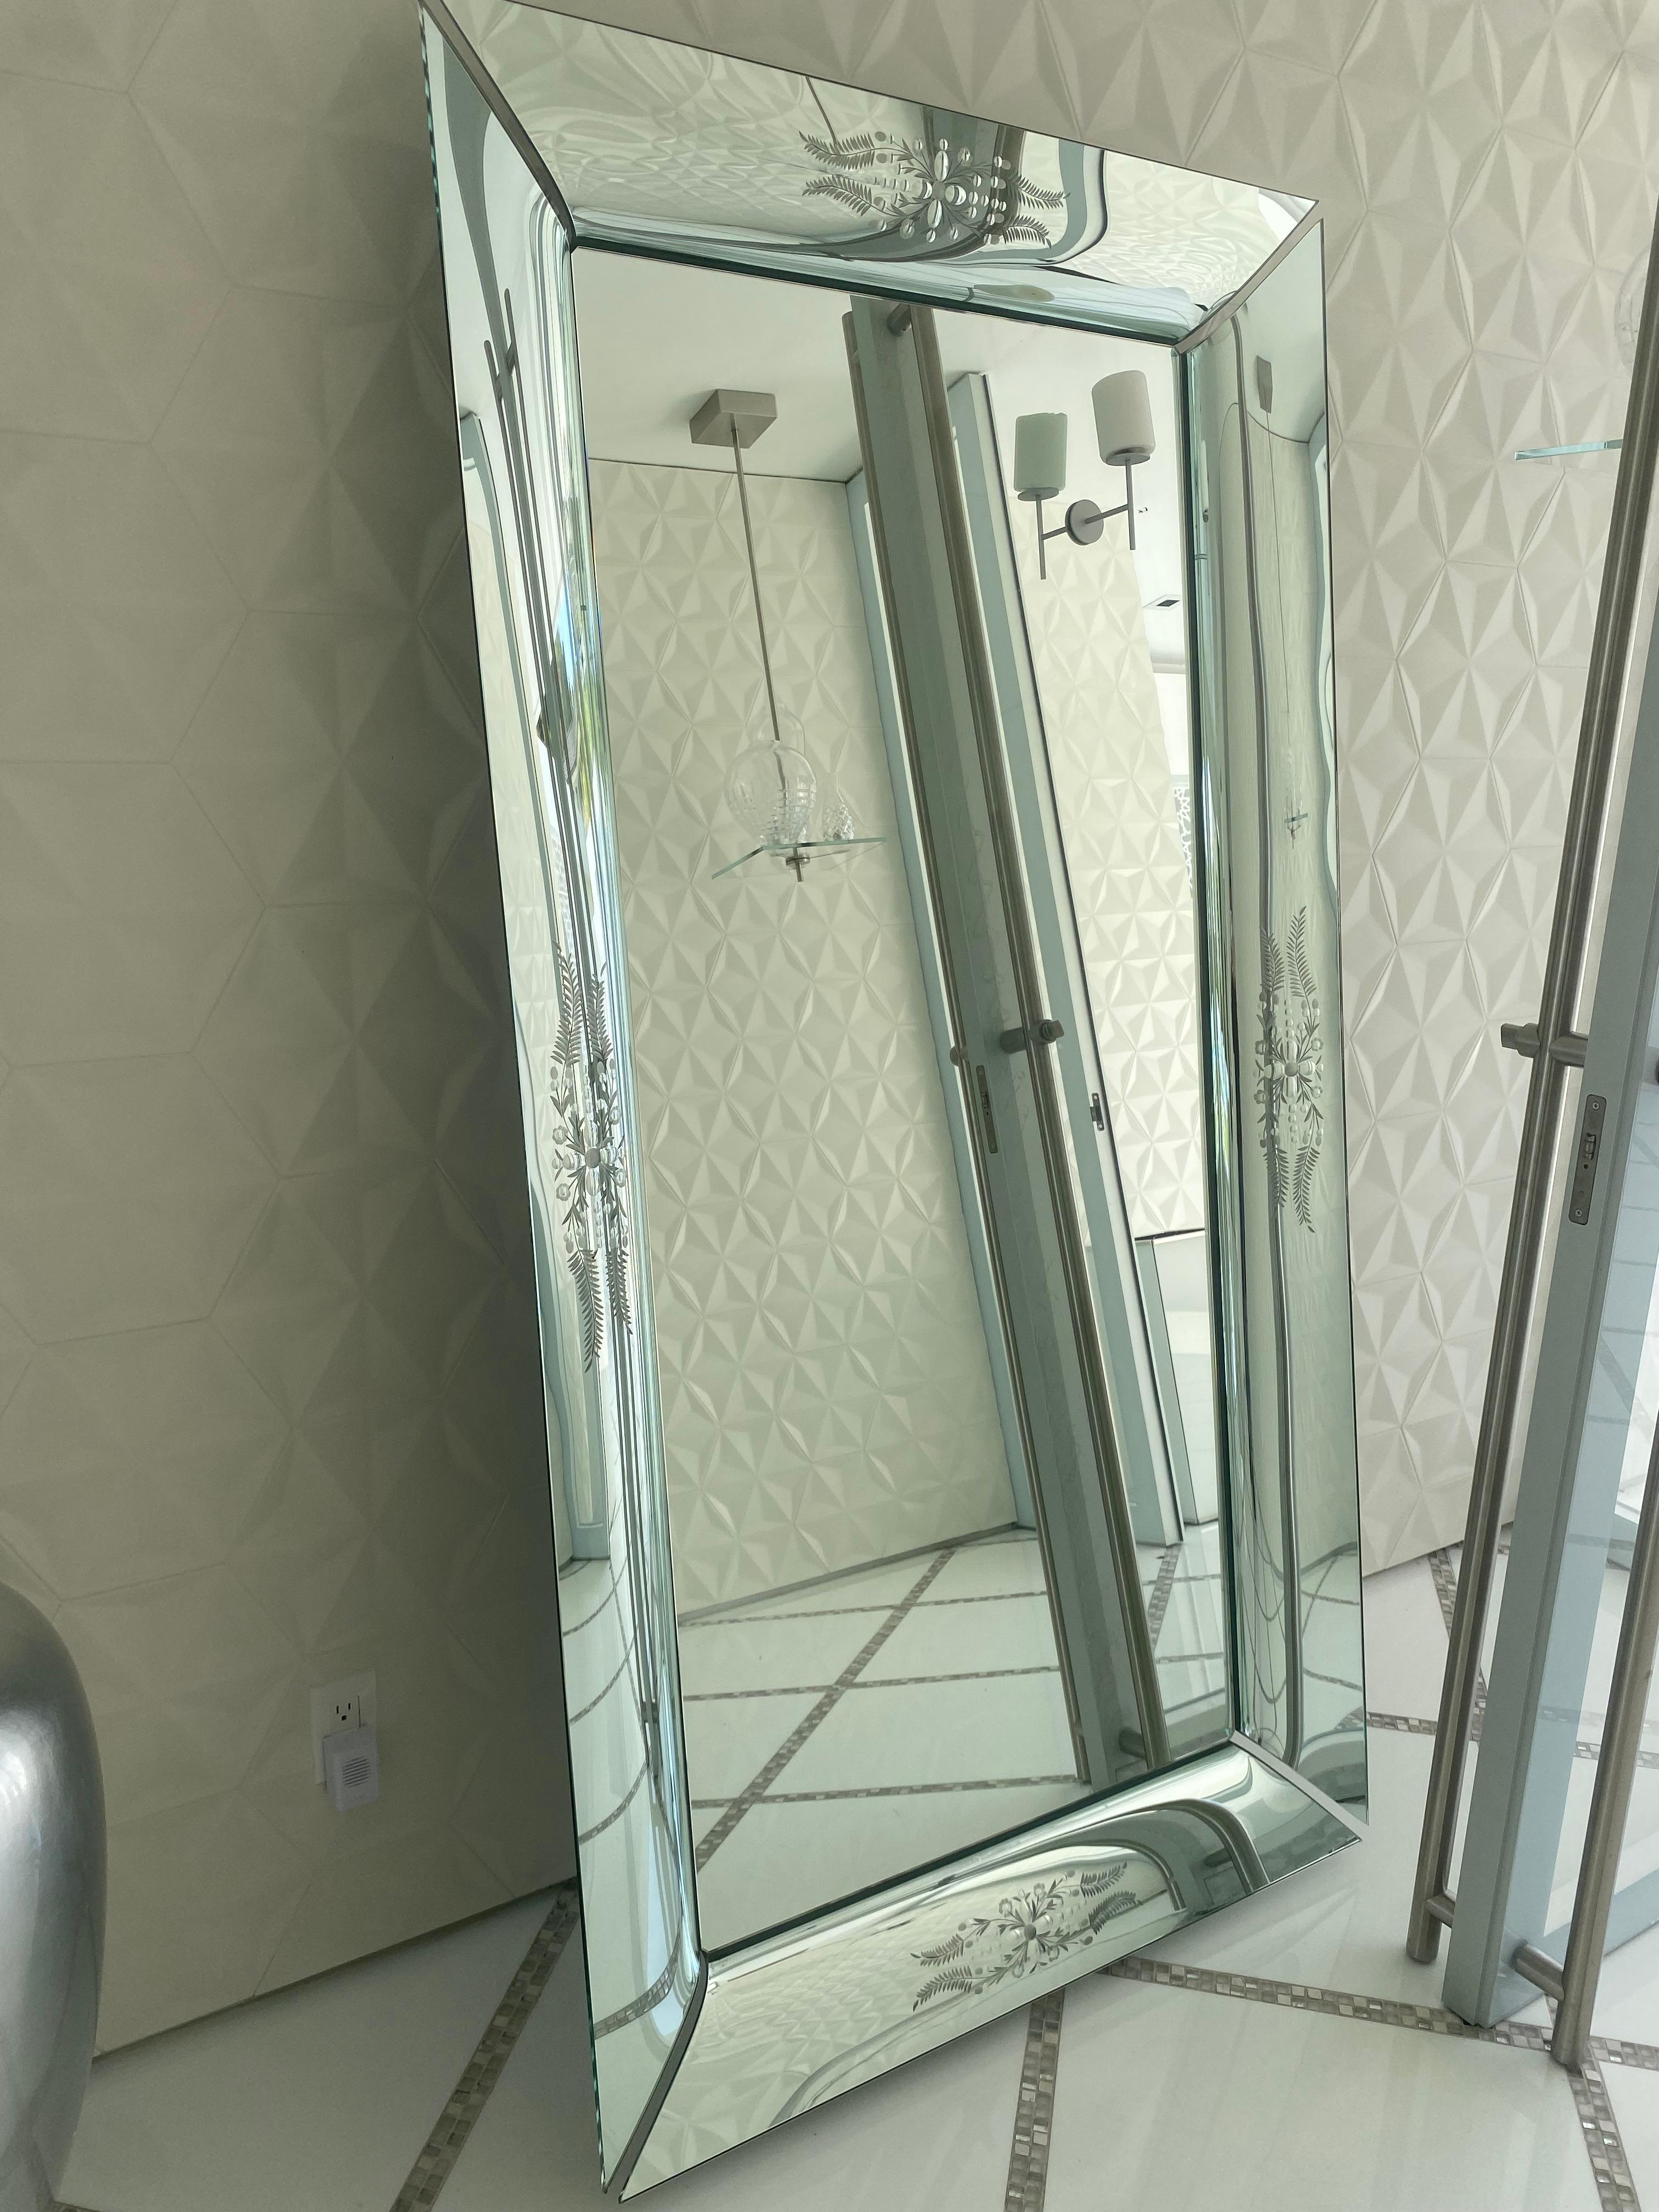 Phillipe Starck Floor Length Mirror made of mirrored glass featuring a beautiful detail throughout.

Mande in France.
In excellent, like brand new condition 